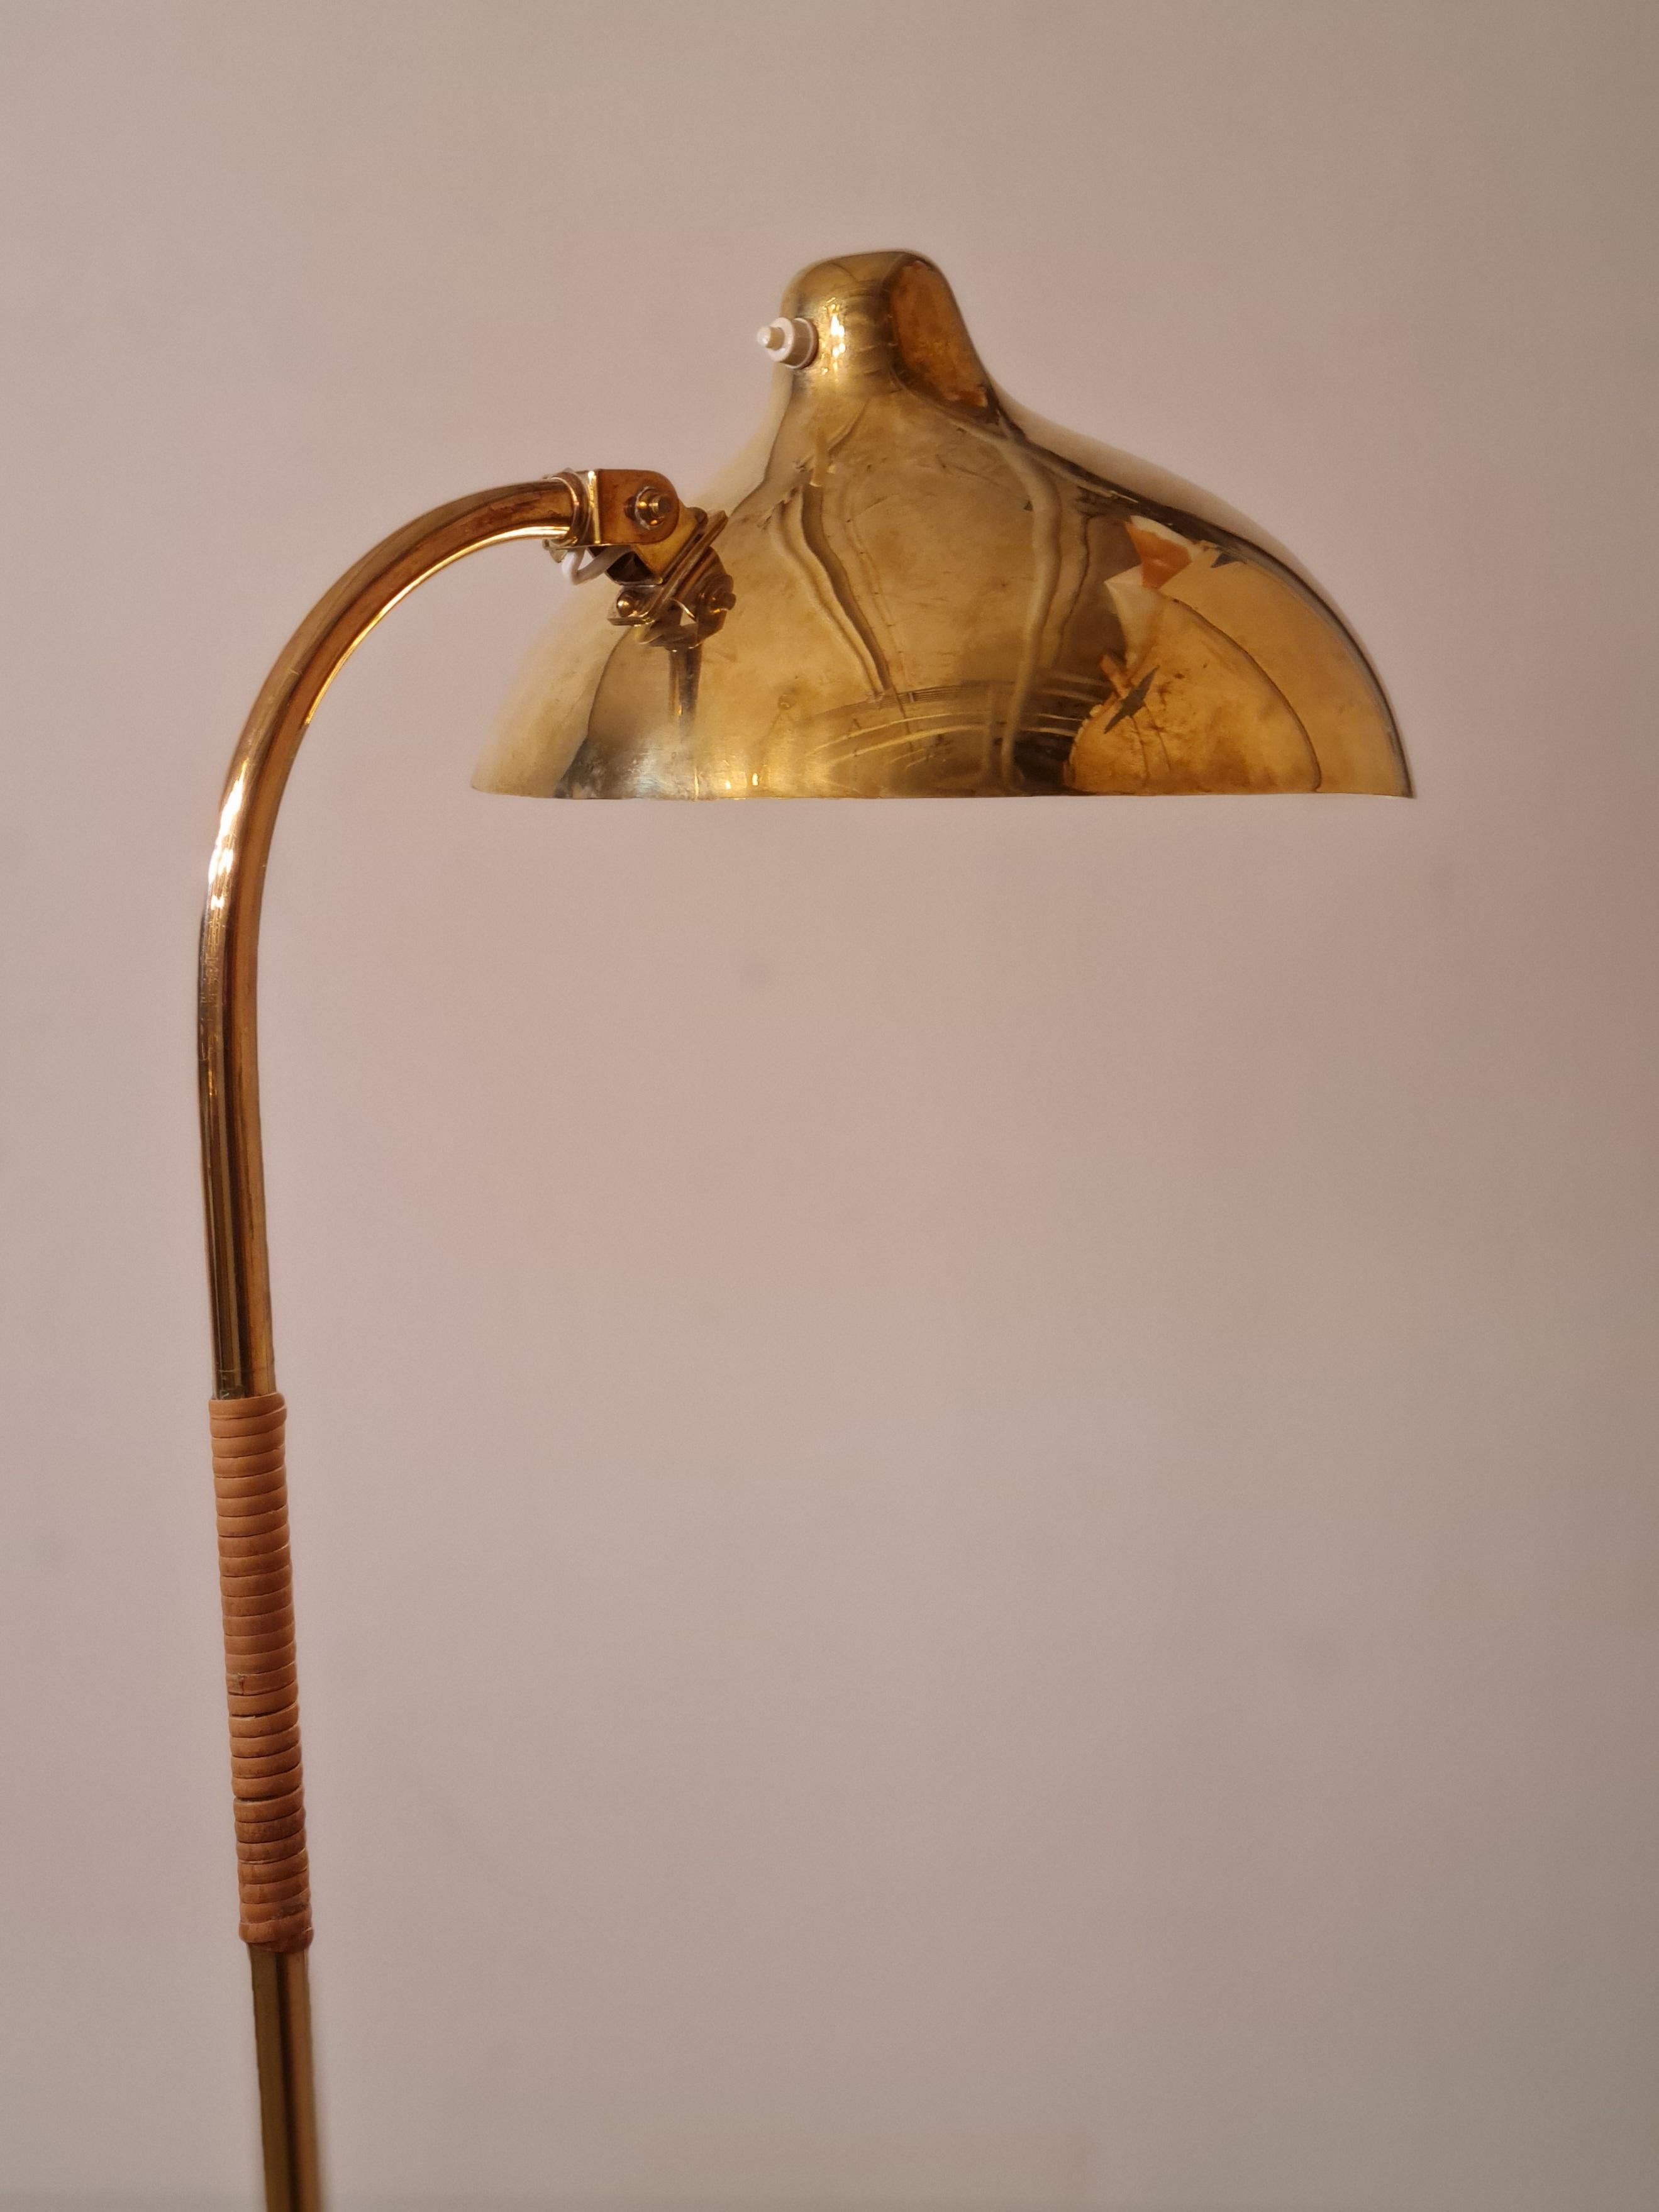 Exceedingly Rare Gunnel Nyman Floor Lamp Model No. 62044 by Idman, 1940 For Sale 5